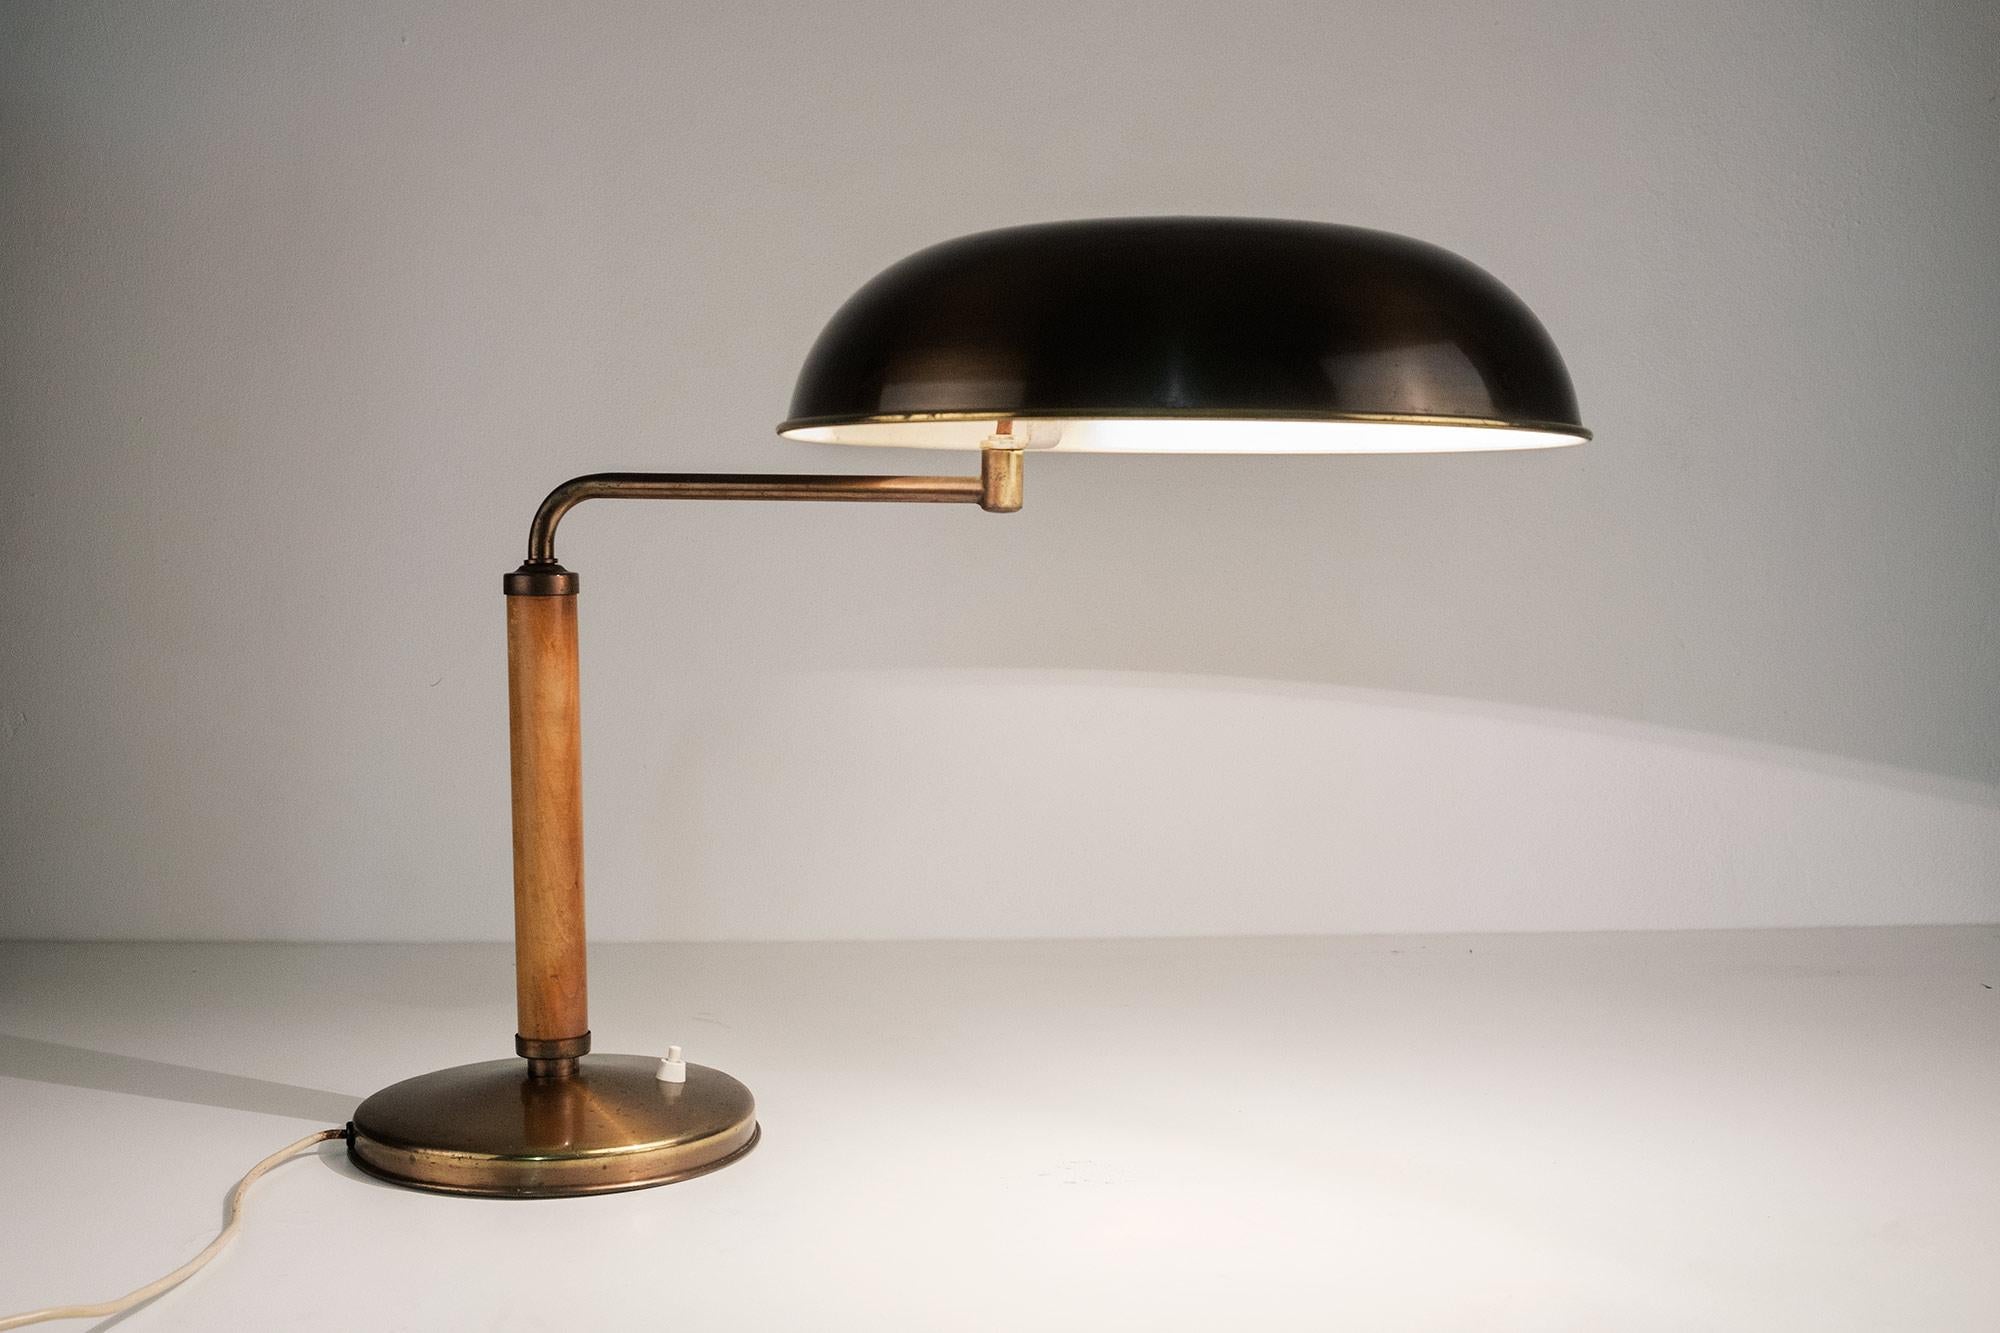 Brass Swiss Bauhaus Table Lamp by Alfred Müller for Amba Basel, 1930s